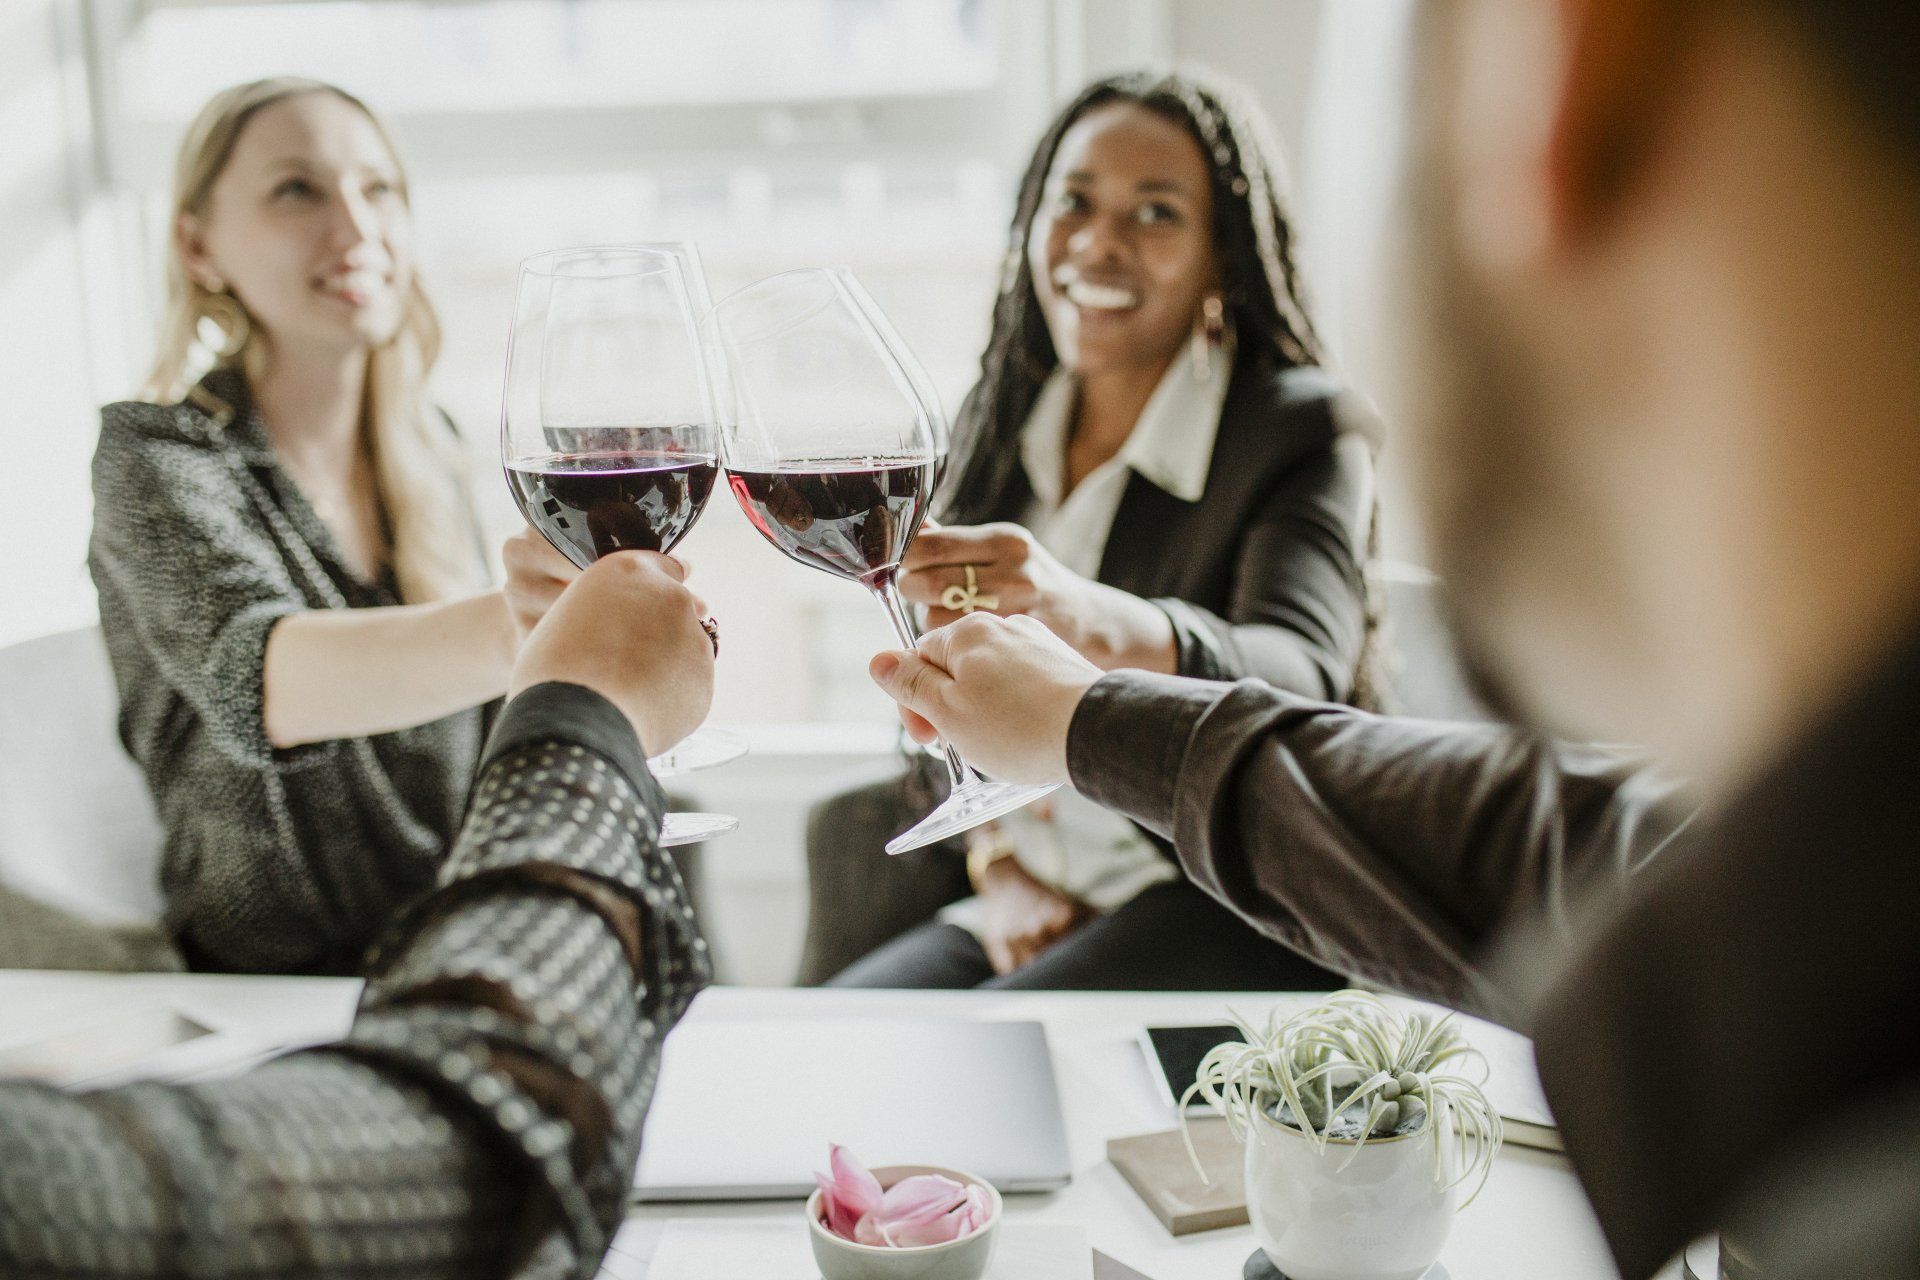 Image of a group of four business people clinking wine glasses over a white table.